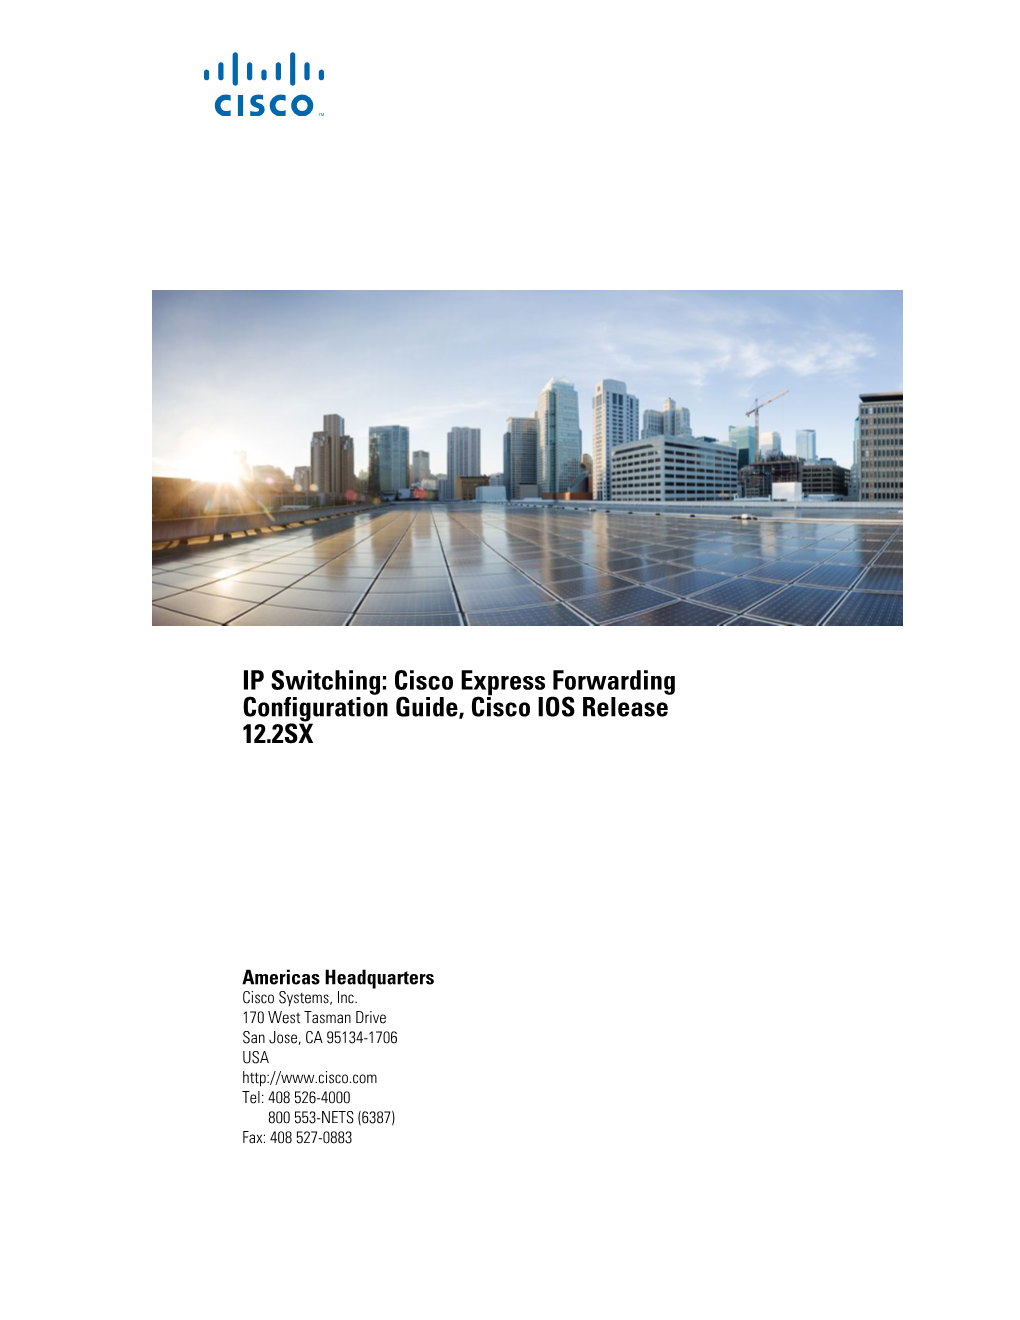 IP Switching: Cisco Express Forwarding Configuration Guide, Cisco IOS Release 12.2SX